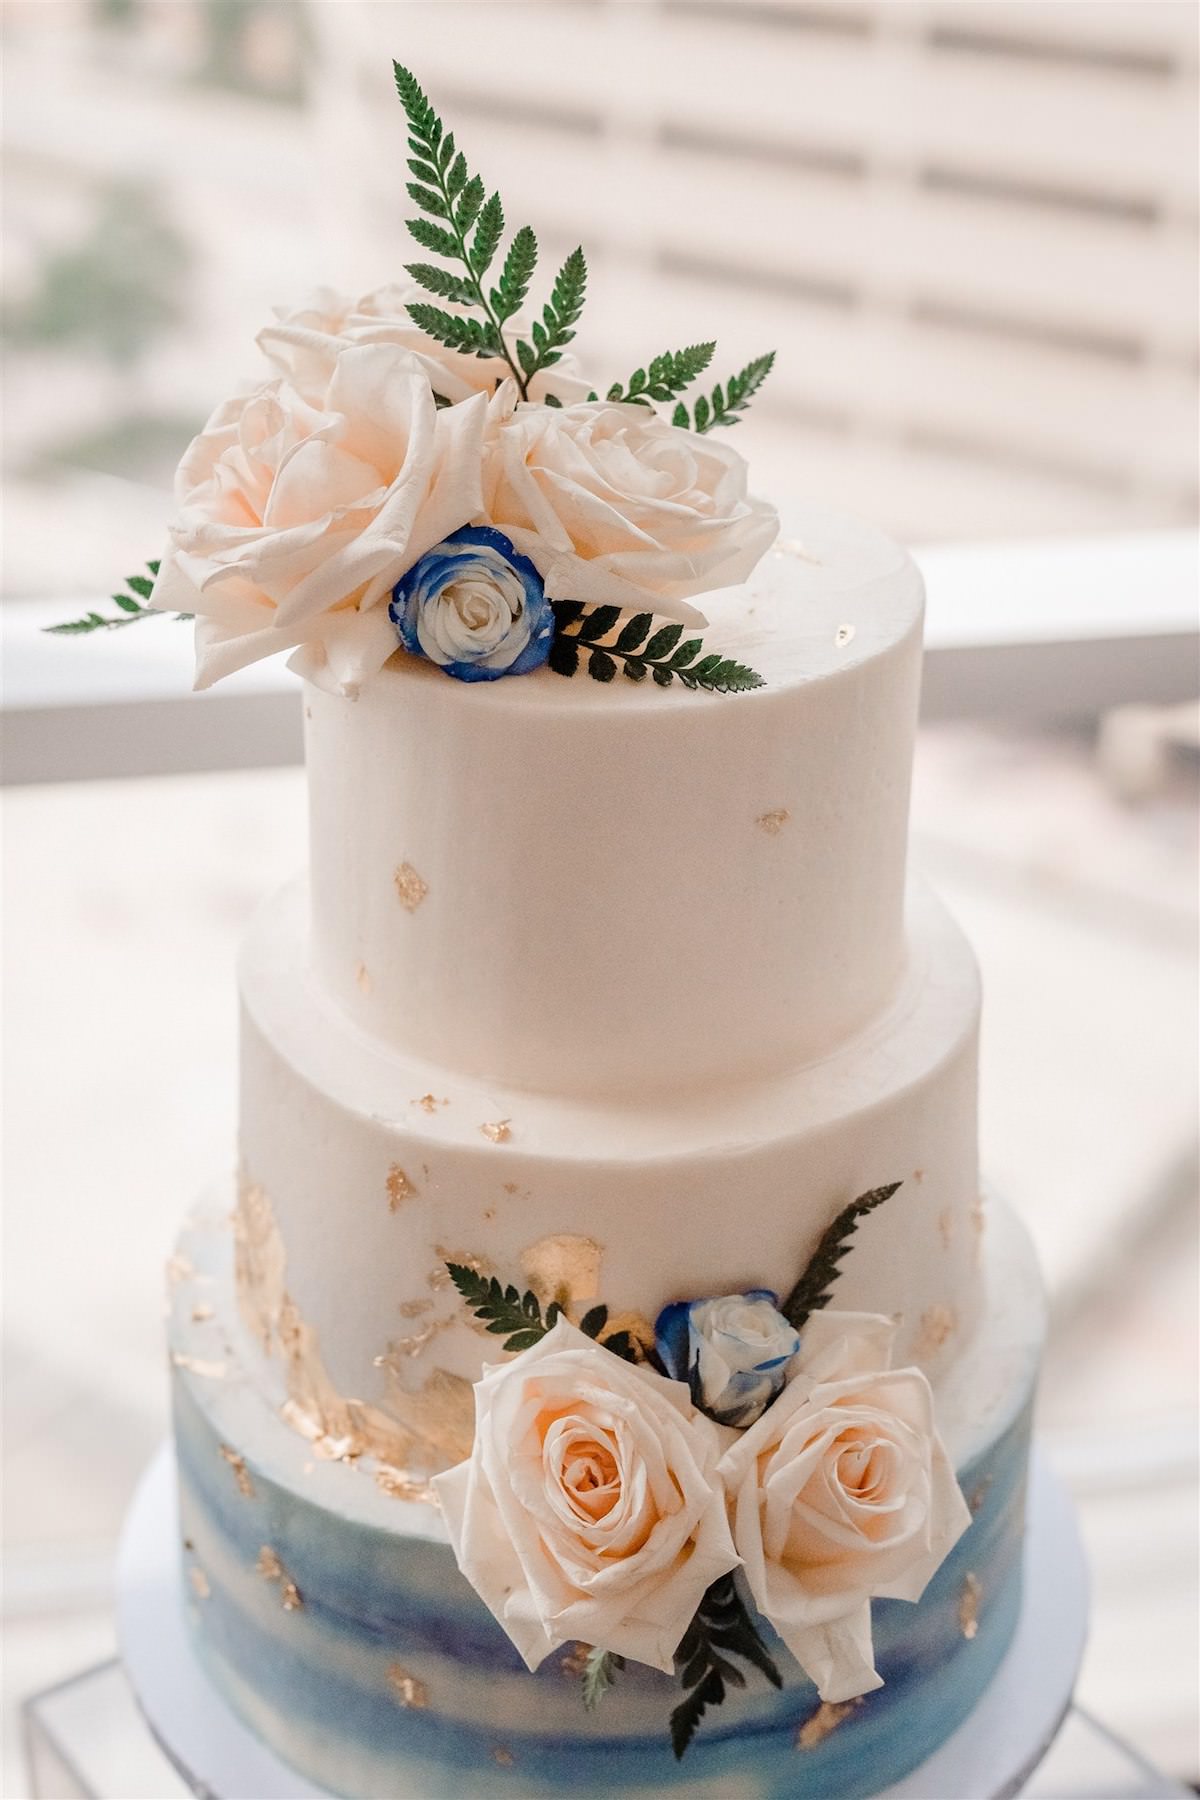 White and blue water color wedding cake - Photography: Tunji Studio Photography